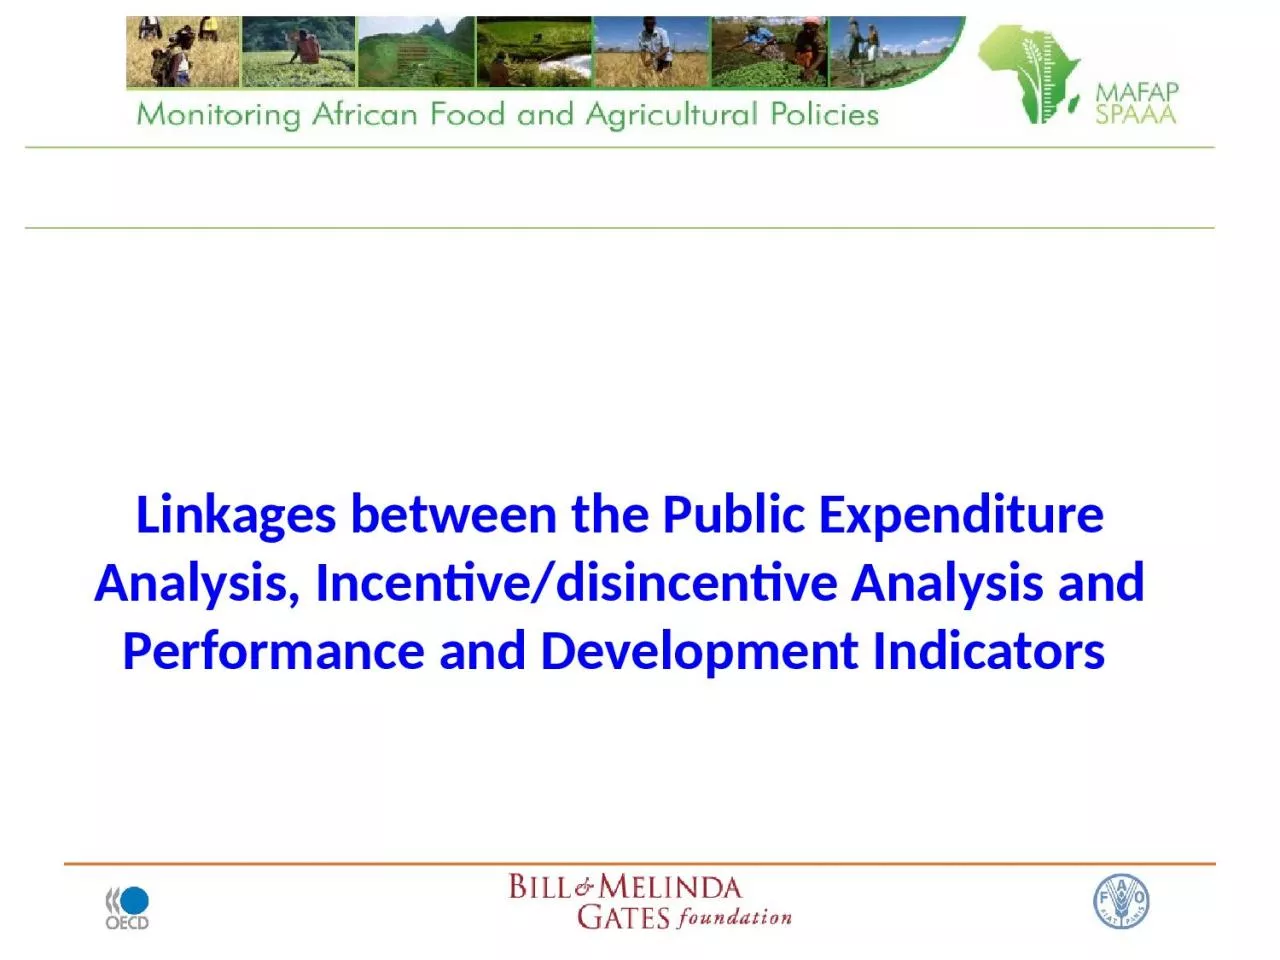 Linkages between the Public Expenditure Analysis, Incentive/disincentive Analysis and